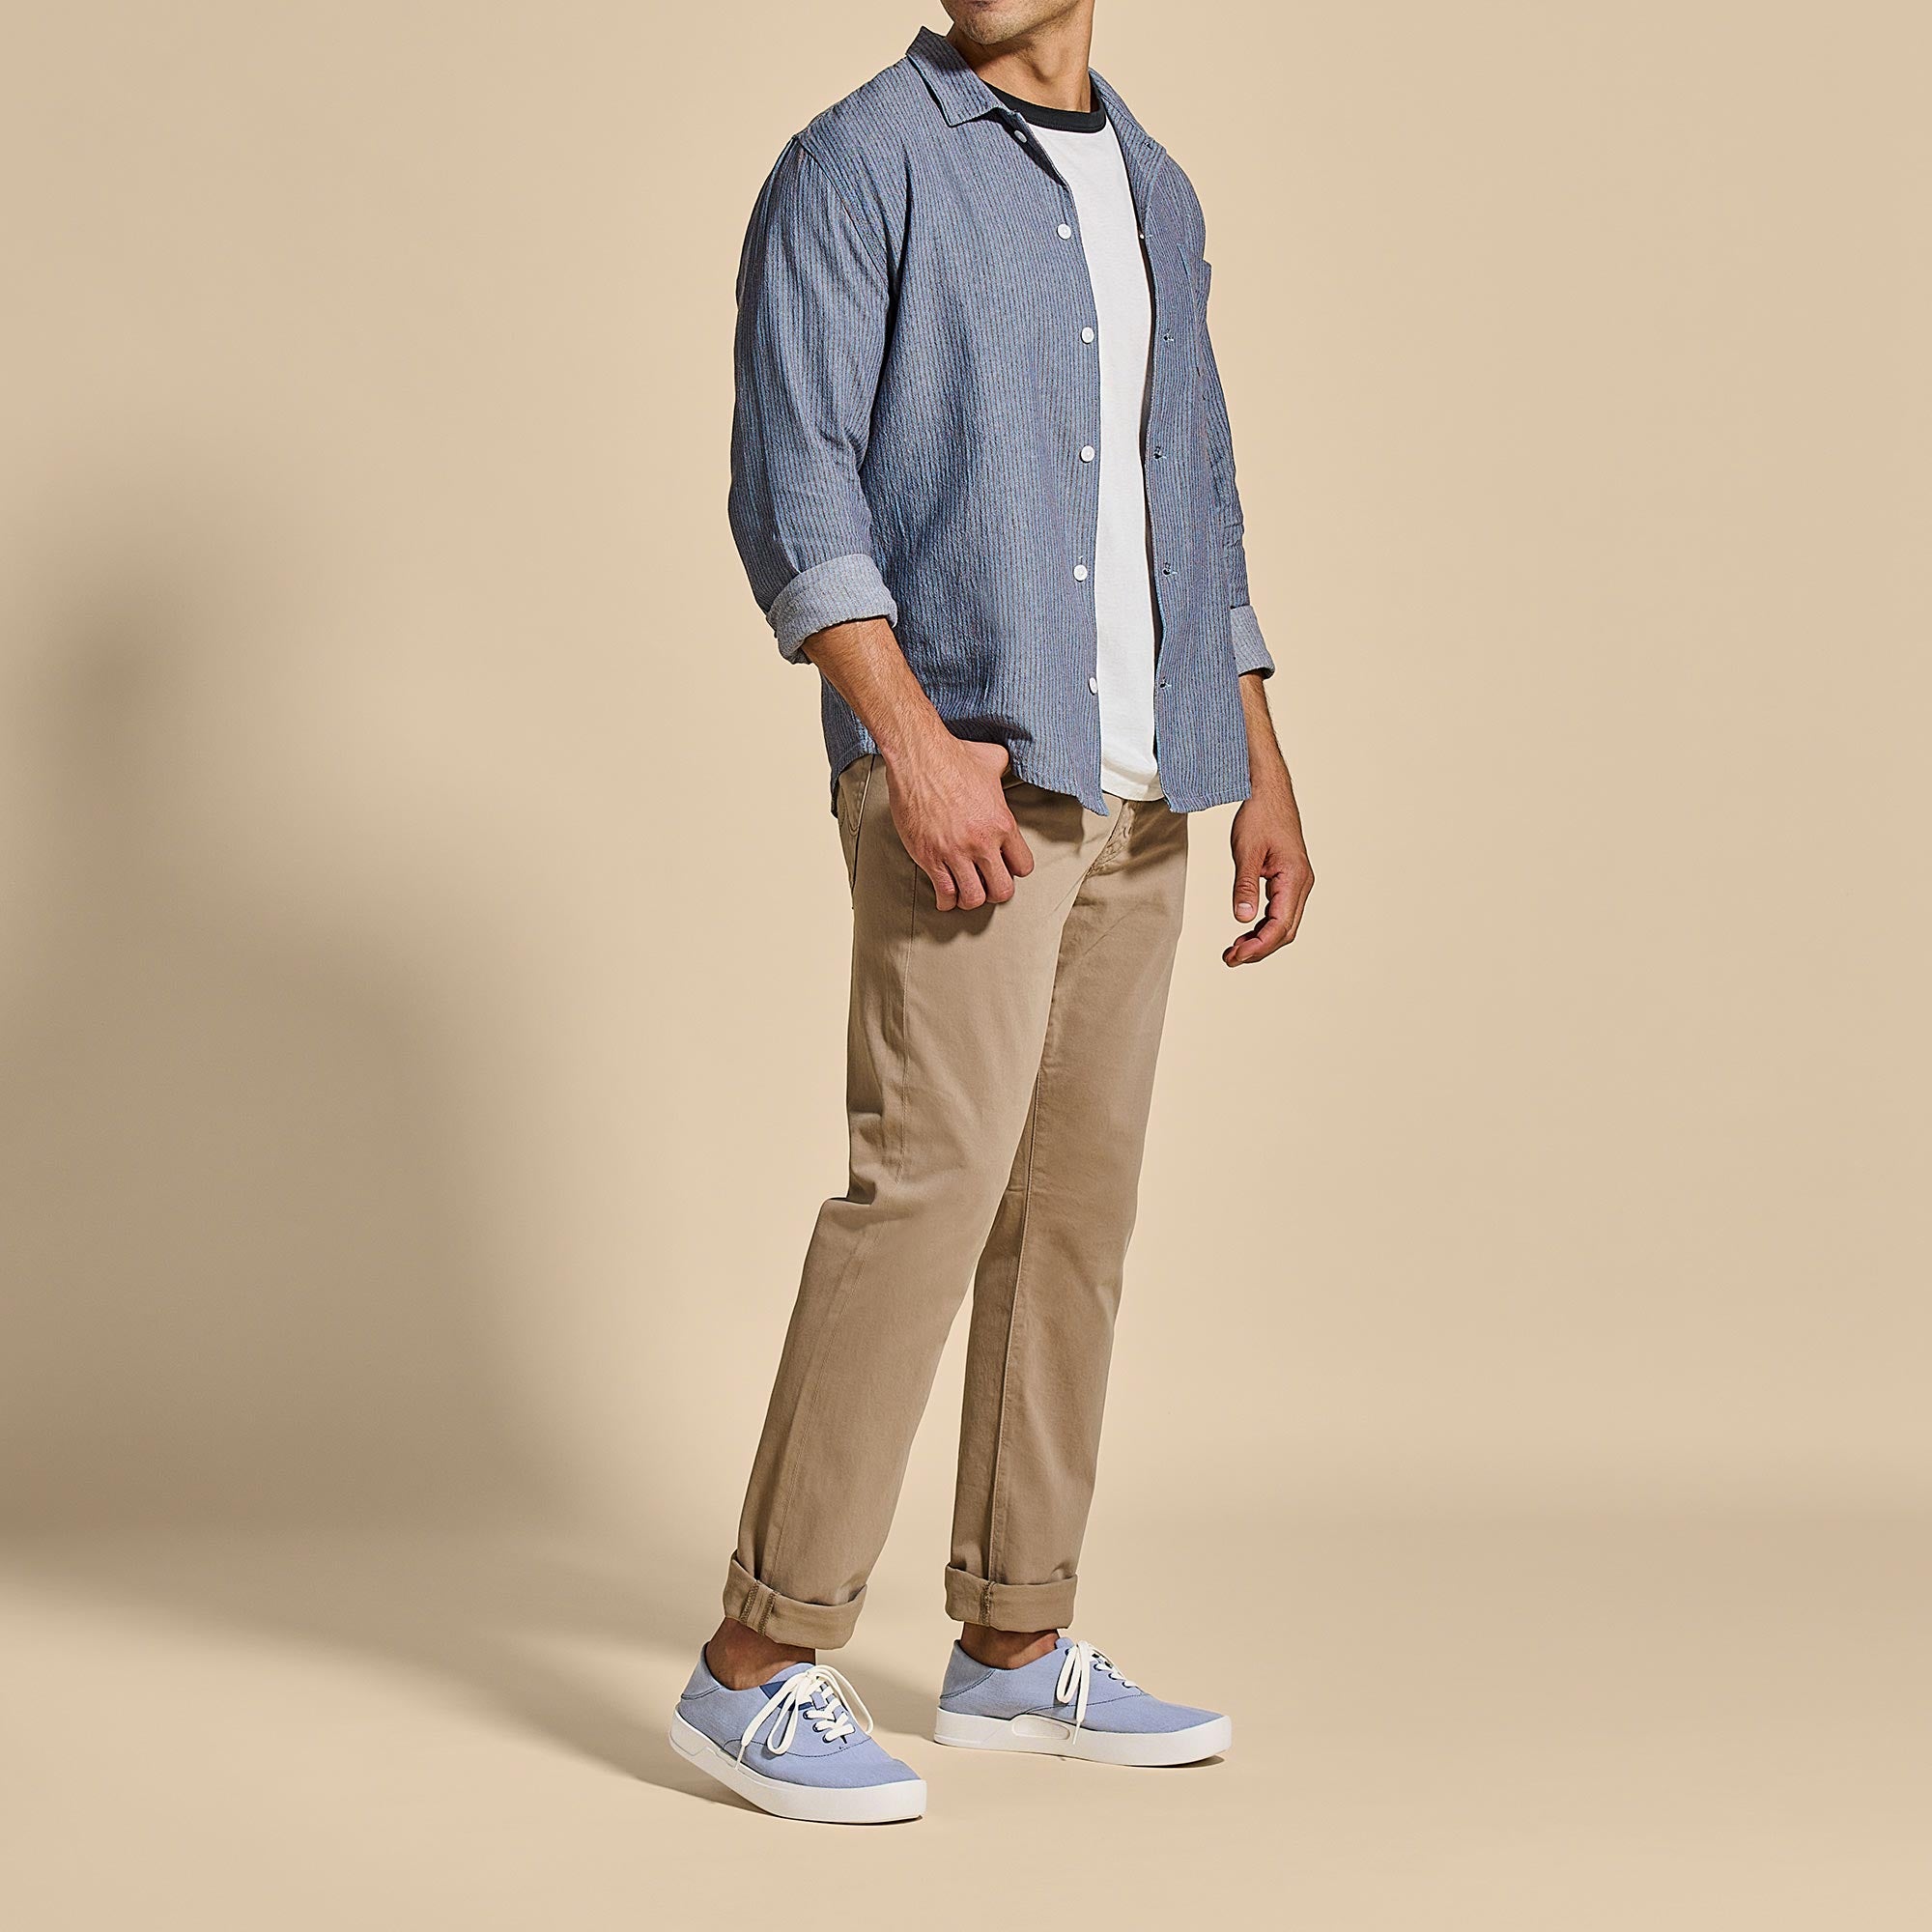 tan pants, a white shirt, a navy blazer and white sneakers that create a  more modern look | Blazer outfits men, Mens outfits, Mens casual outfits